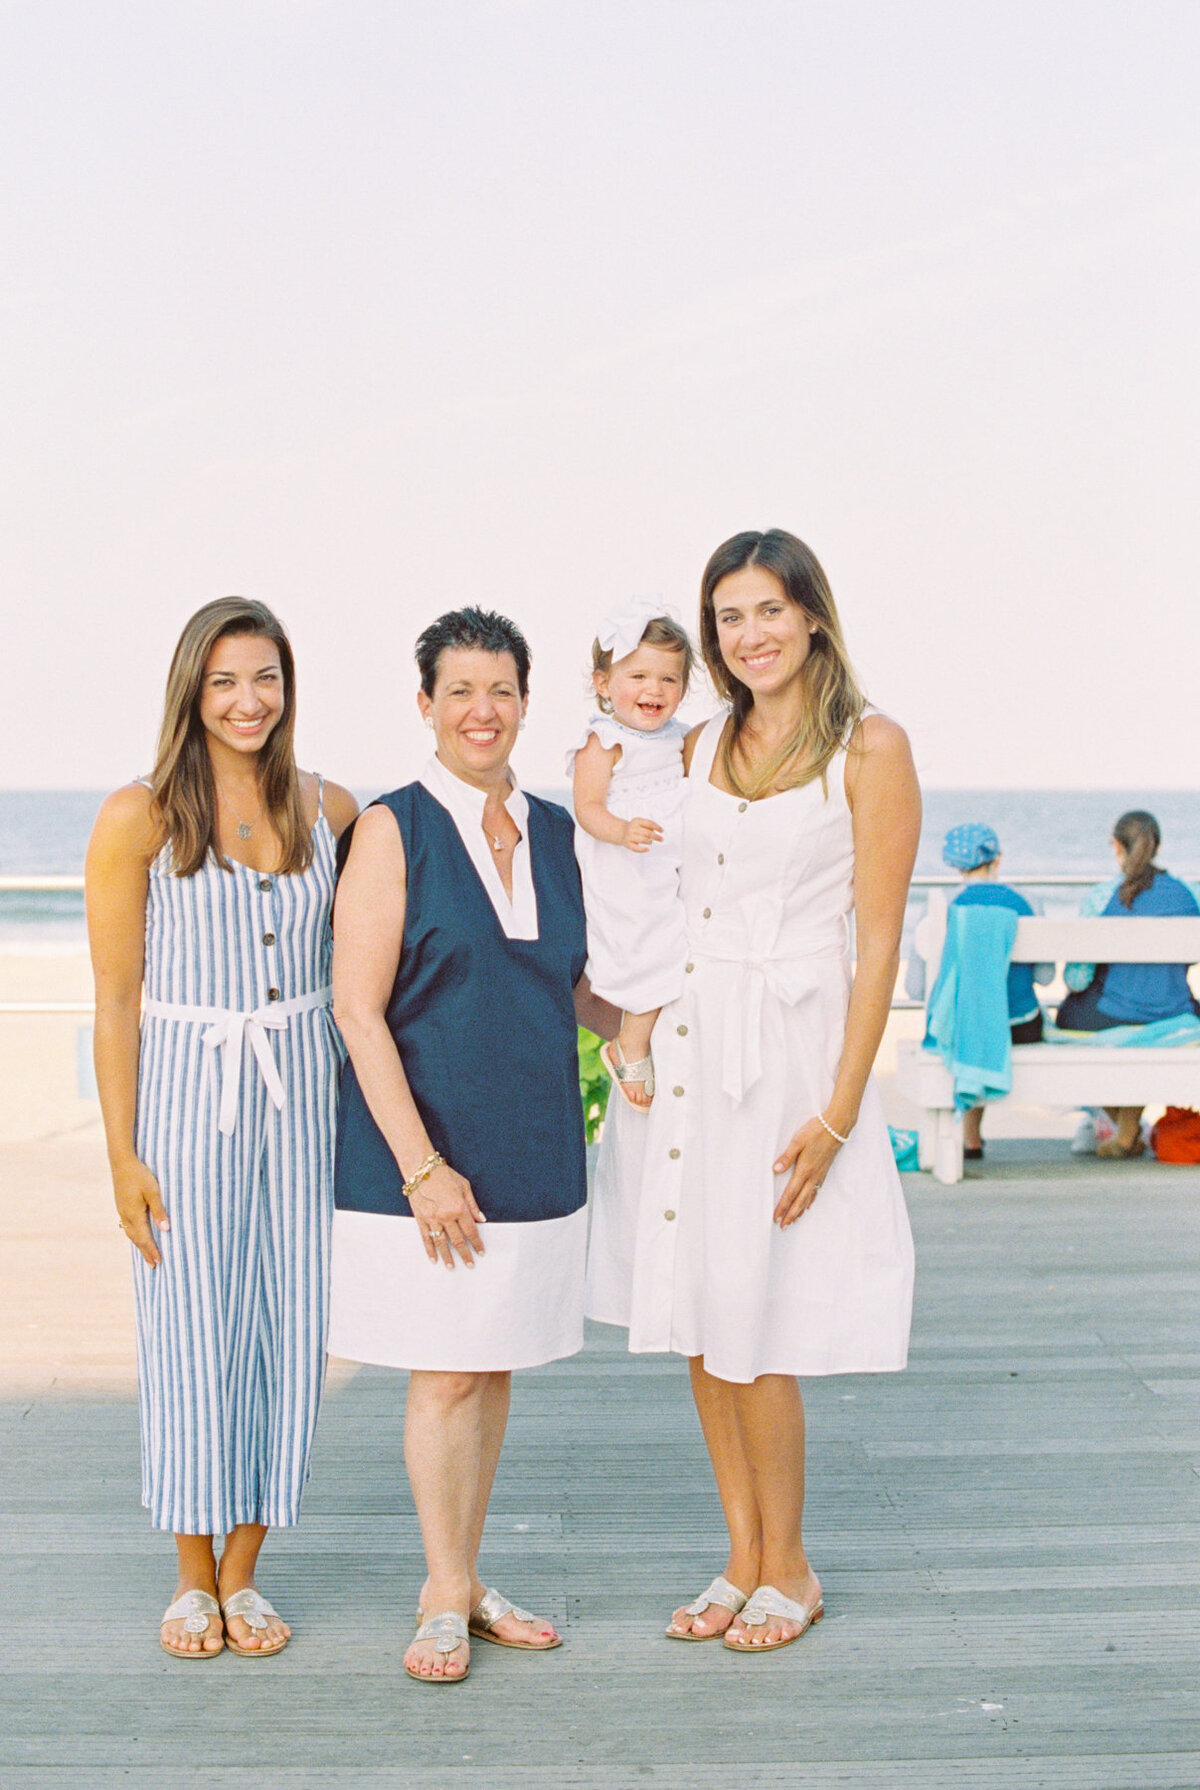 Michelle Behre Photography NJ Fine Art Photographer Seaside Family Lifestyle Family Portrait Session in Avon-by-the-Sea-130